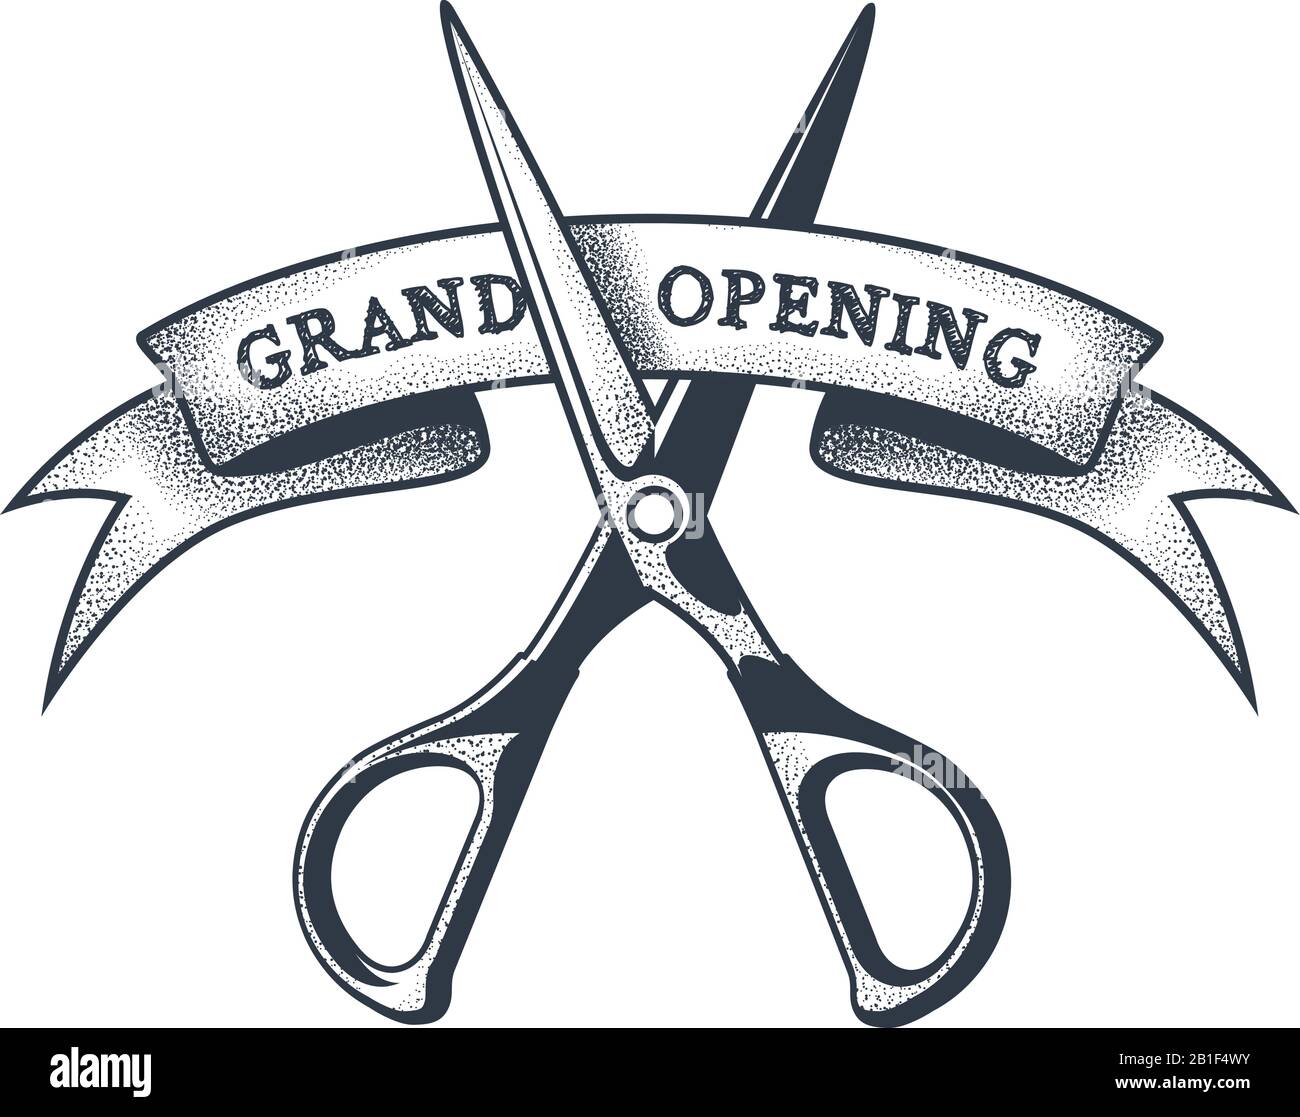 Grand opening banner - scissors cutting a ribbon, launching a project, vintage badge Stock Vector